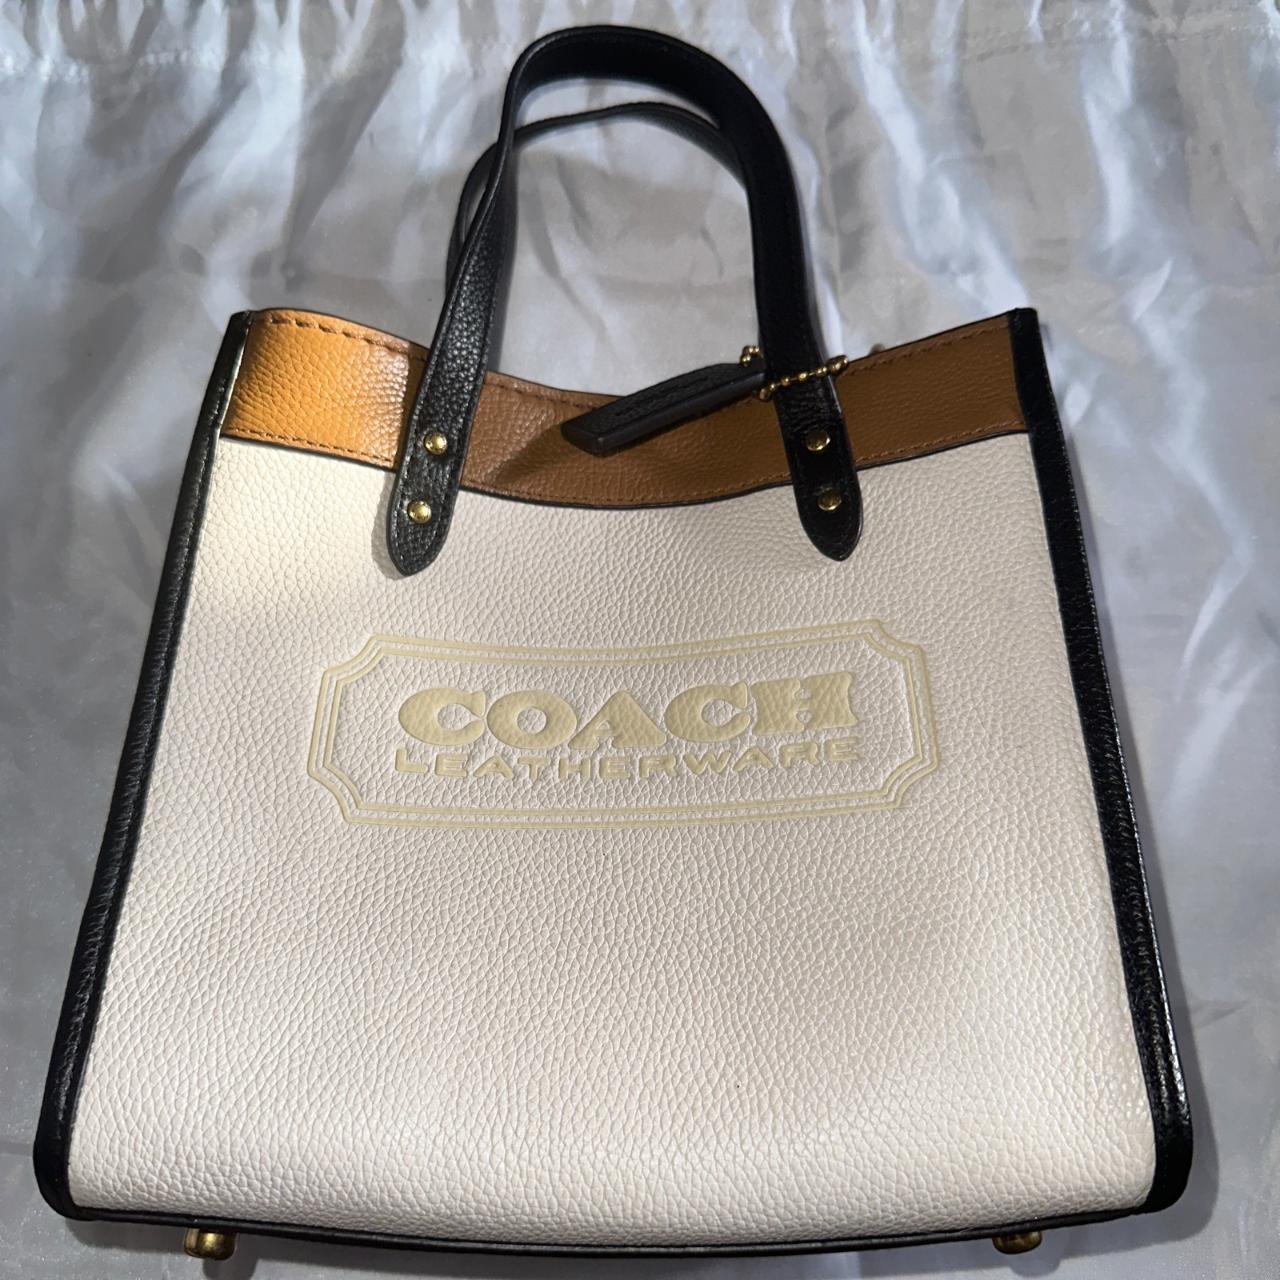 Coach Field Tote 30 Bag In Colorblock With Coach Badge